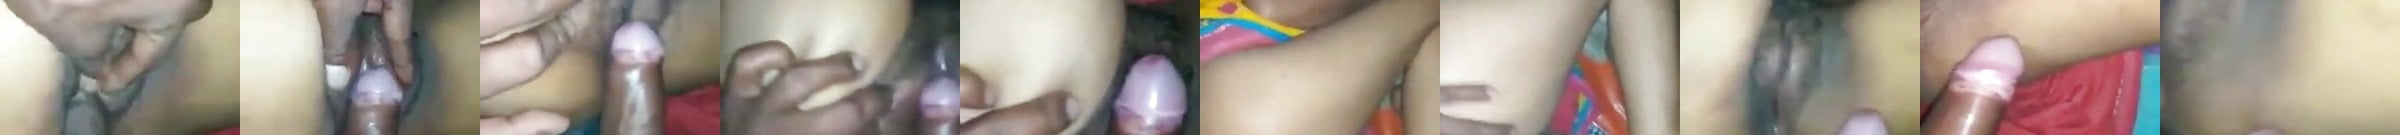 Mangalsutra Around Cock Free Indian Hd Porn Df Xhamster Xhamster